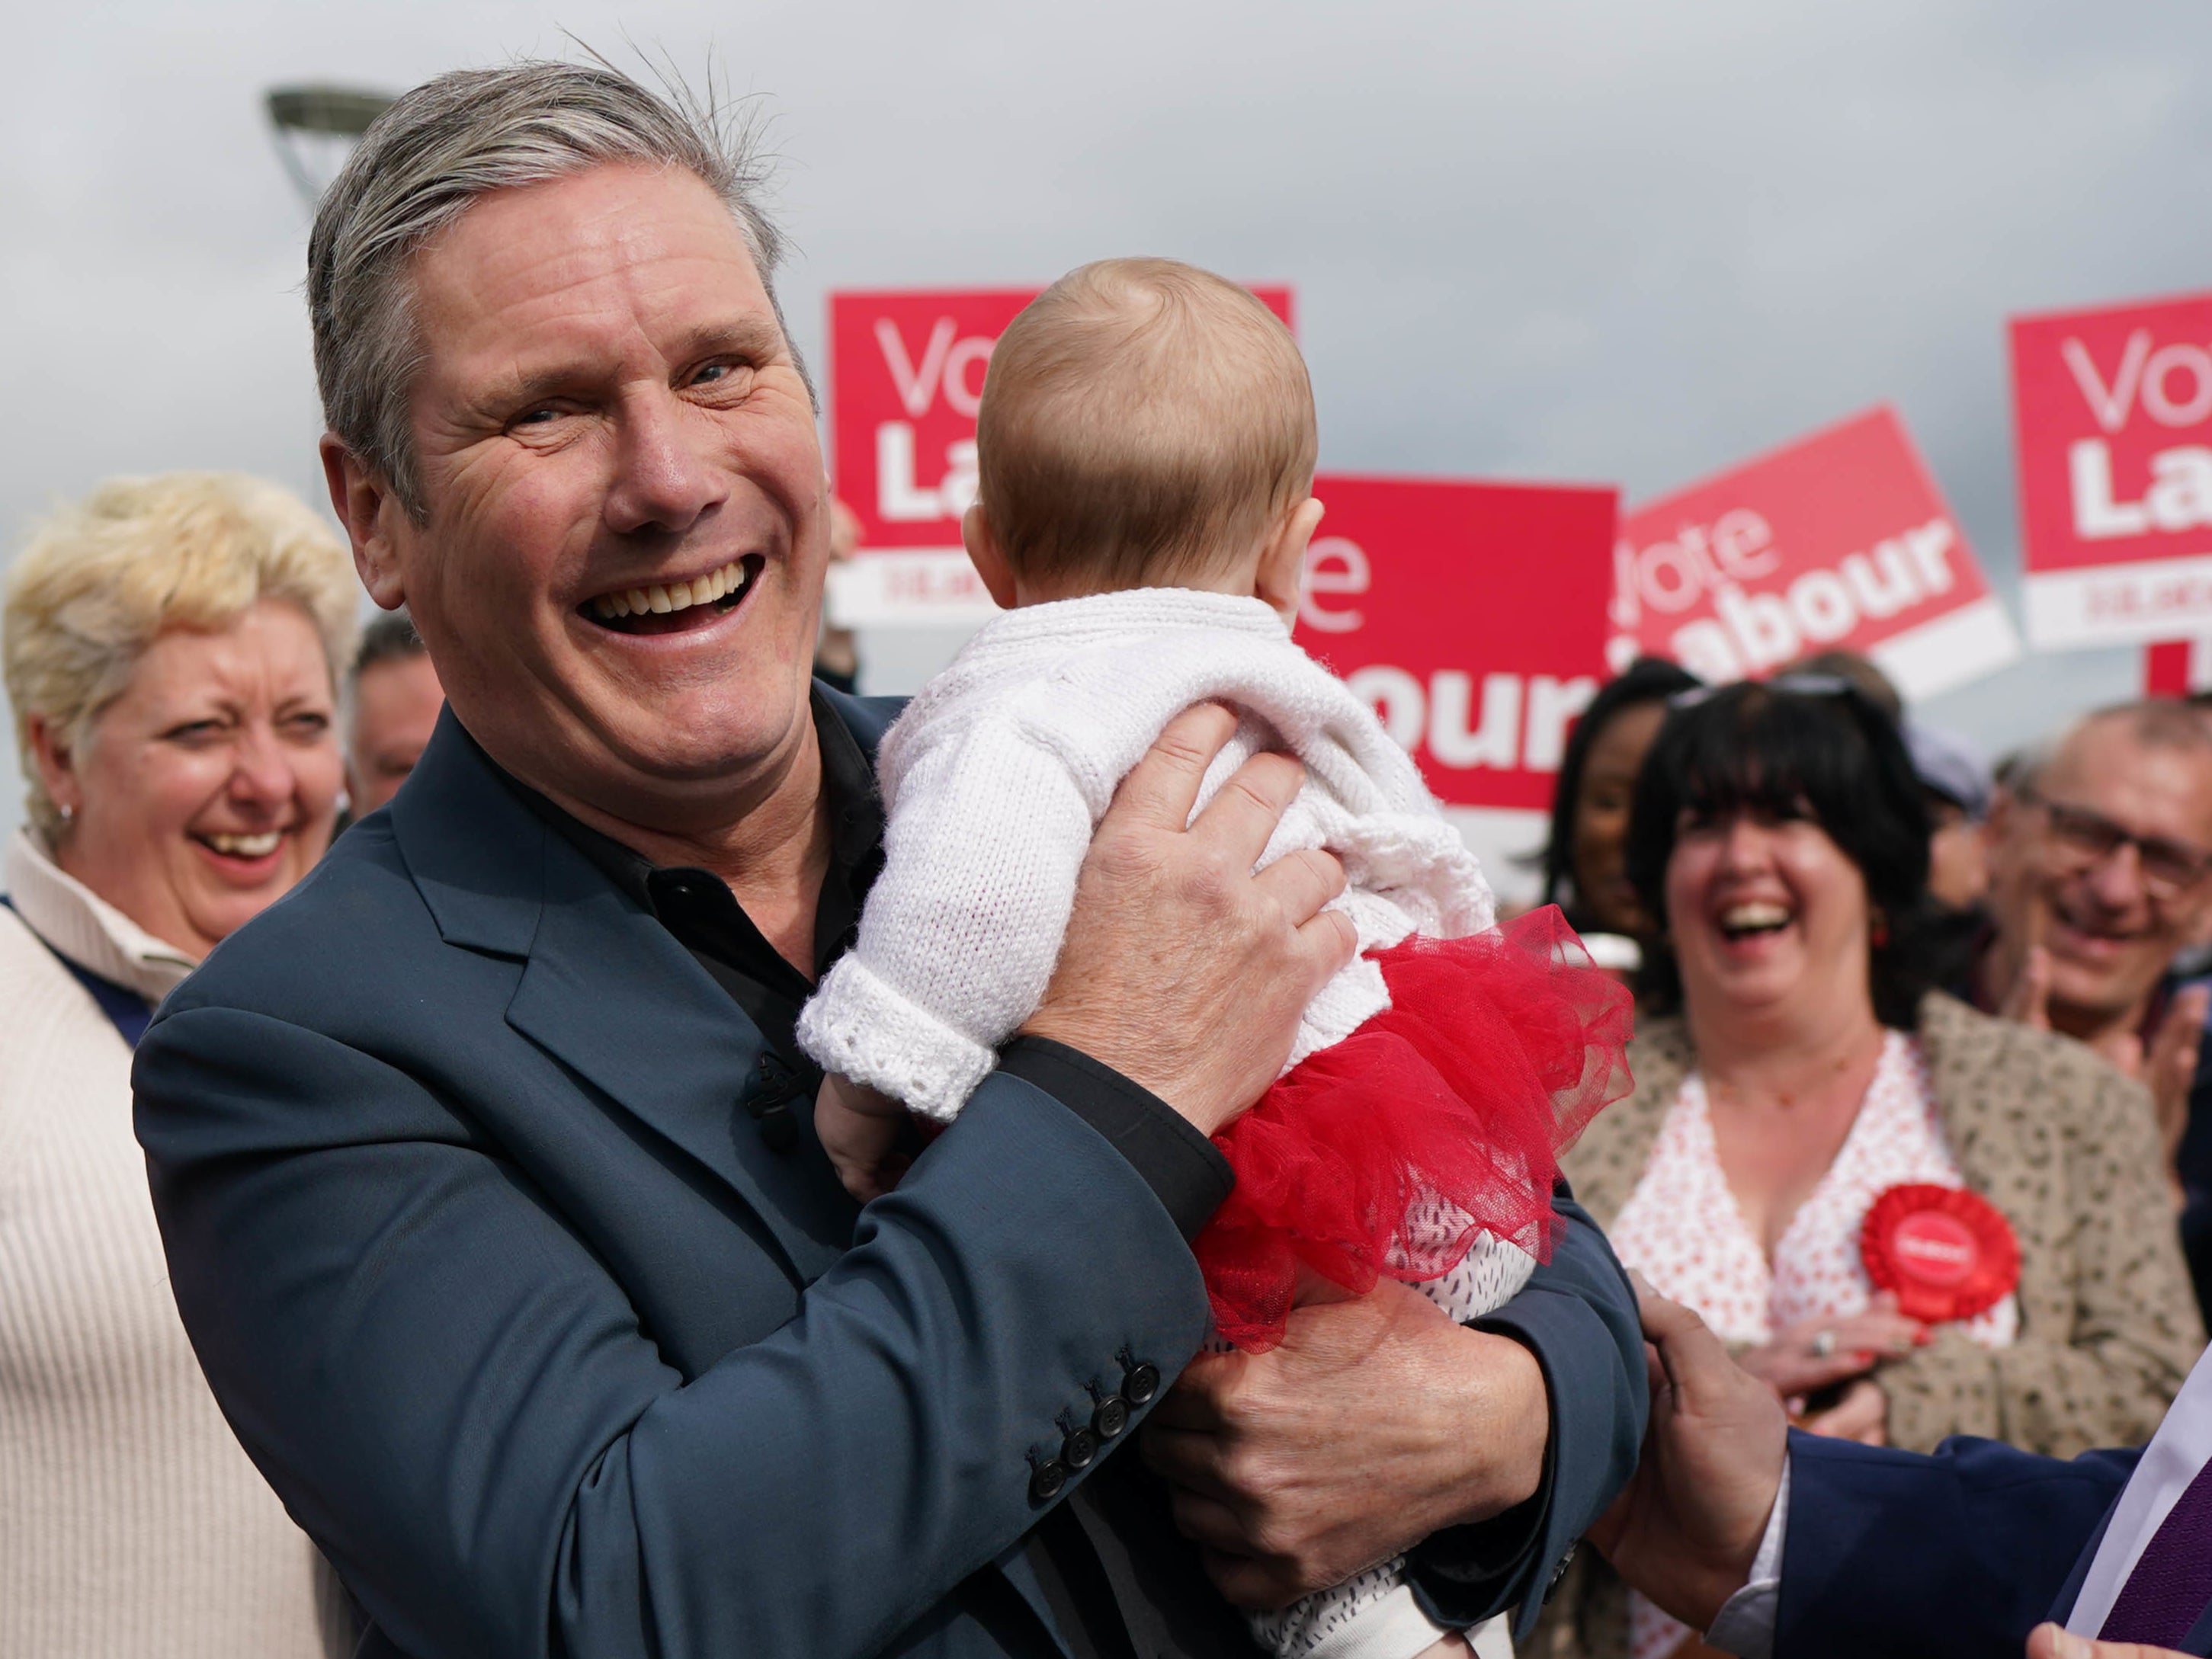 Labour spokespersons were keen to argue that the results demonstrated Sir Keir Starmer’s success